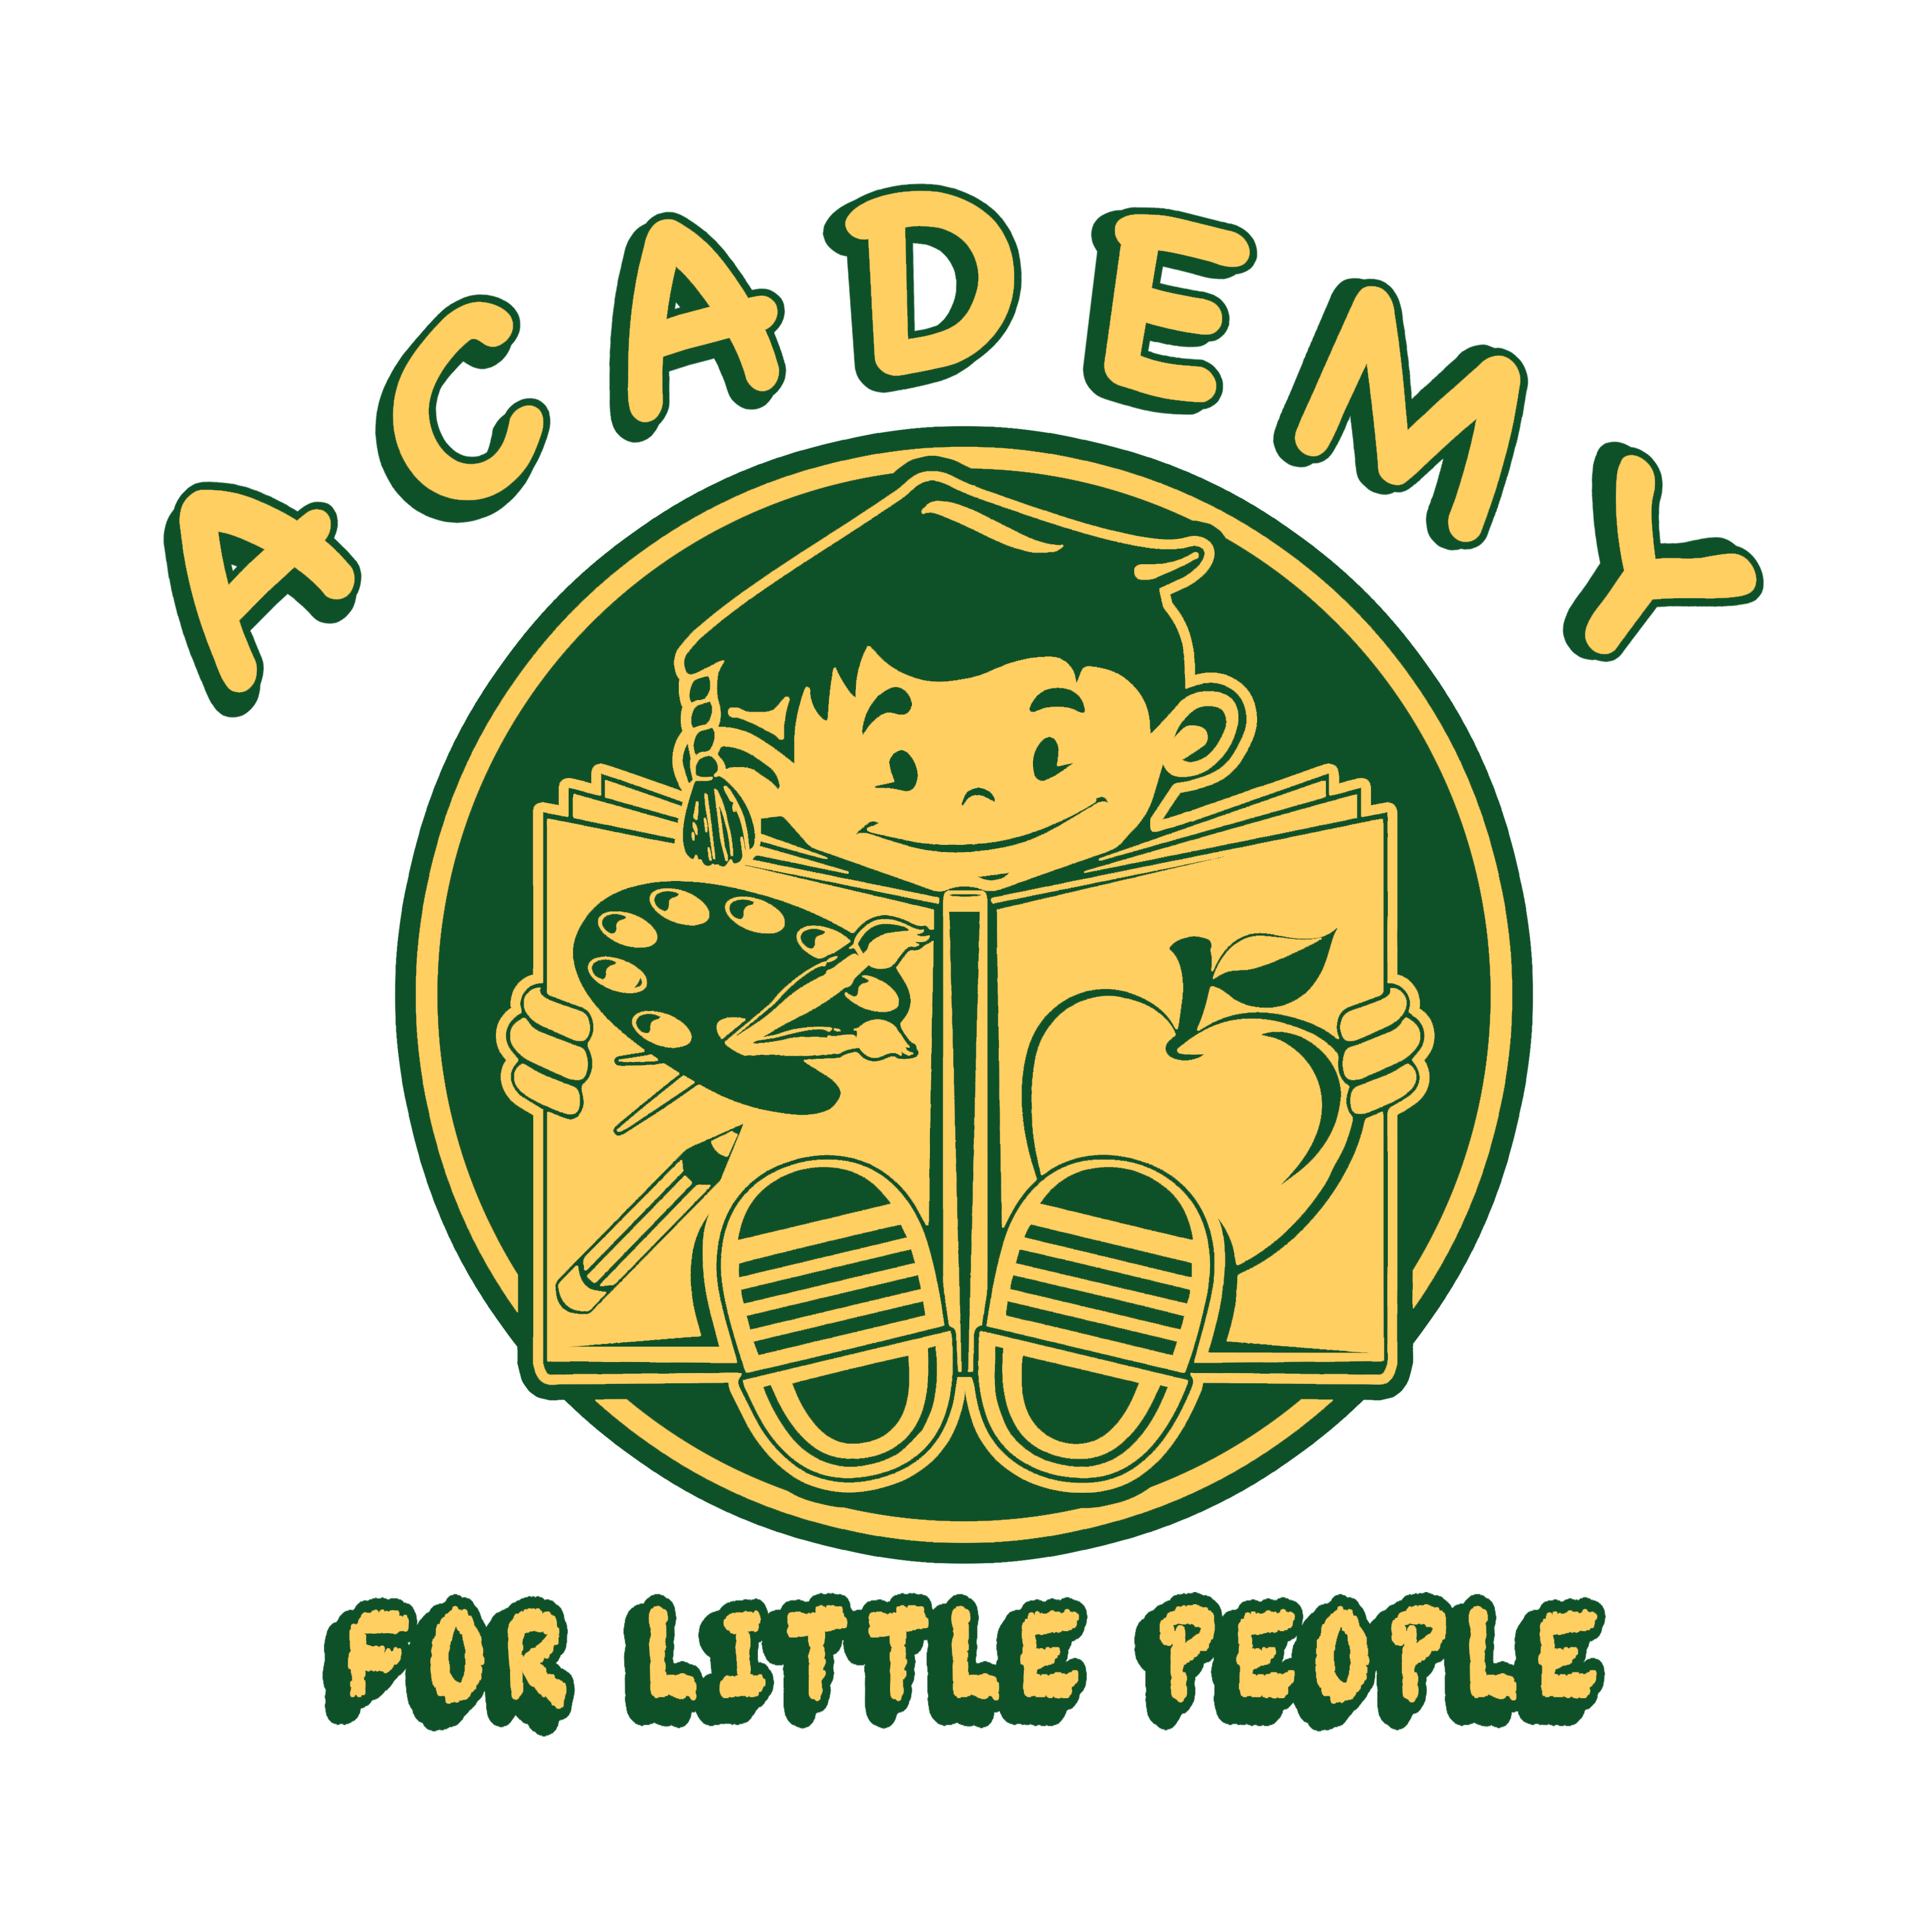 The Academy for Little People